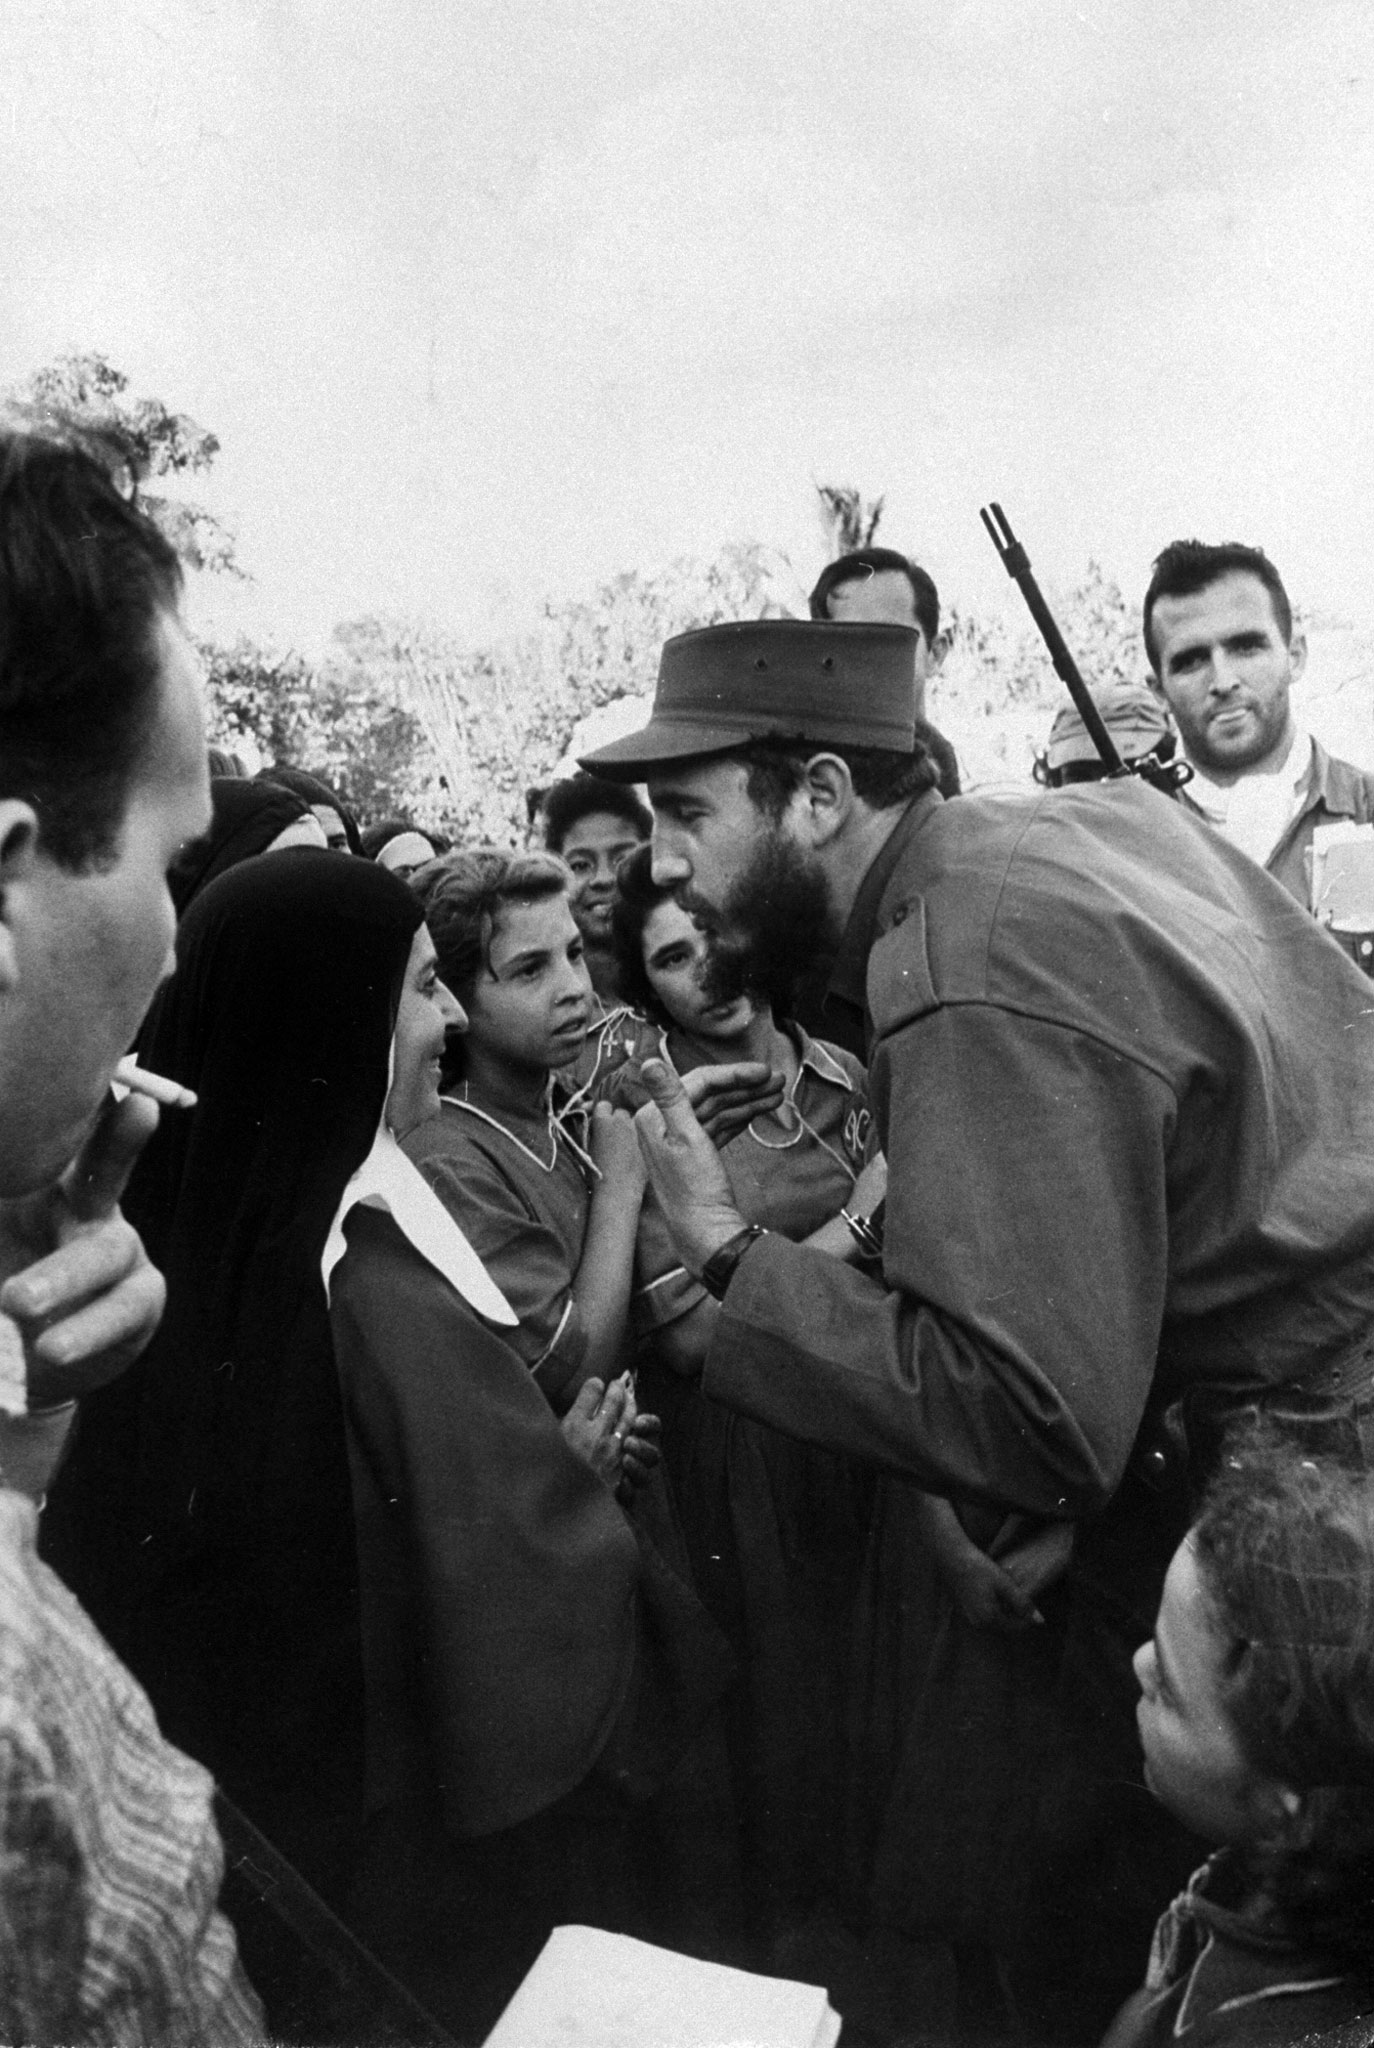 Fidel Castro talking to a nun during his victorious march to Havana, 1959.